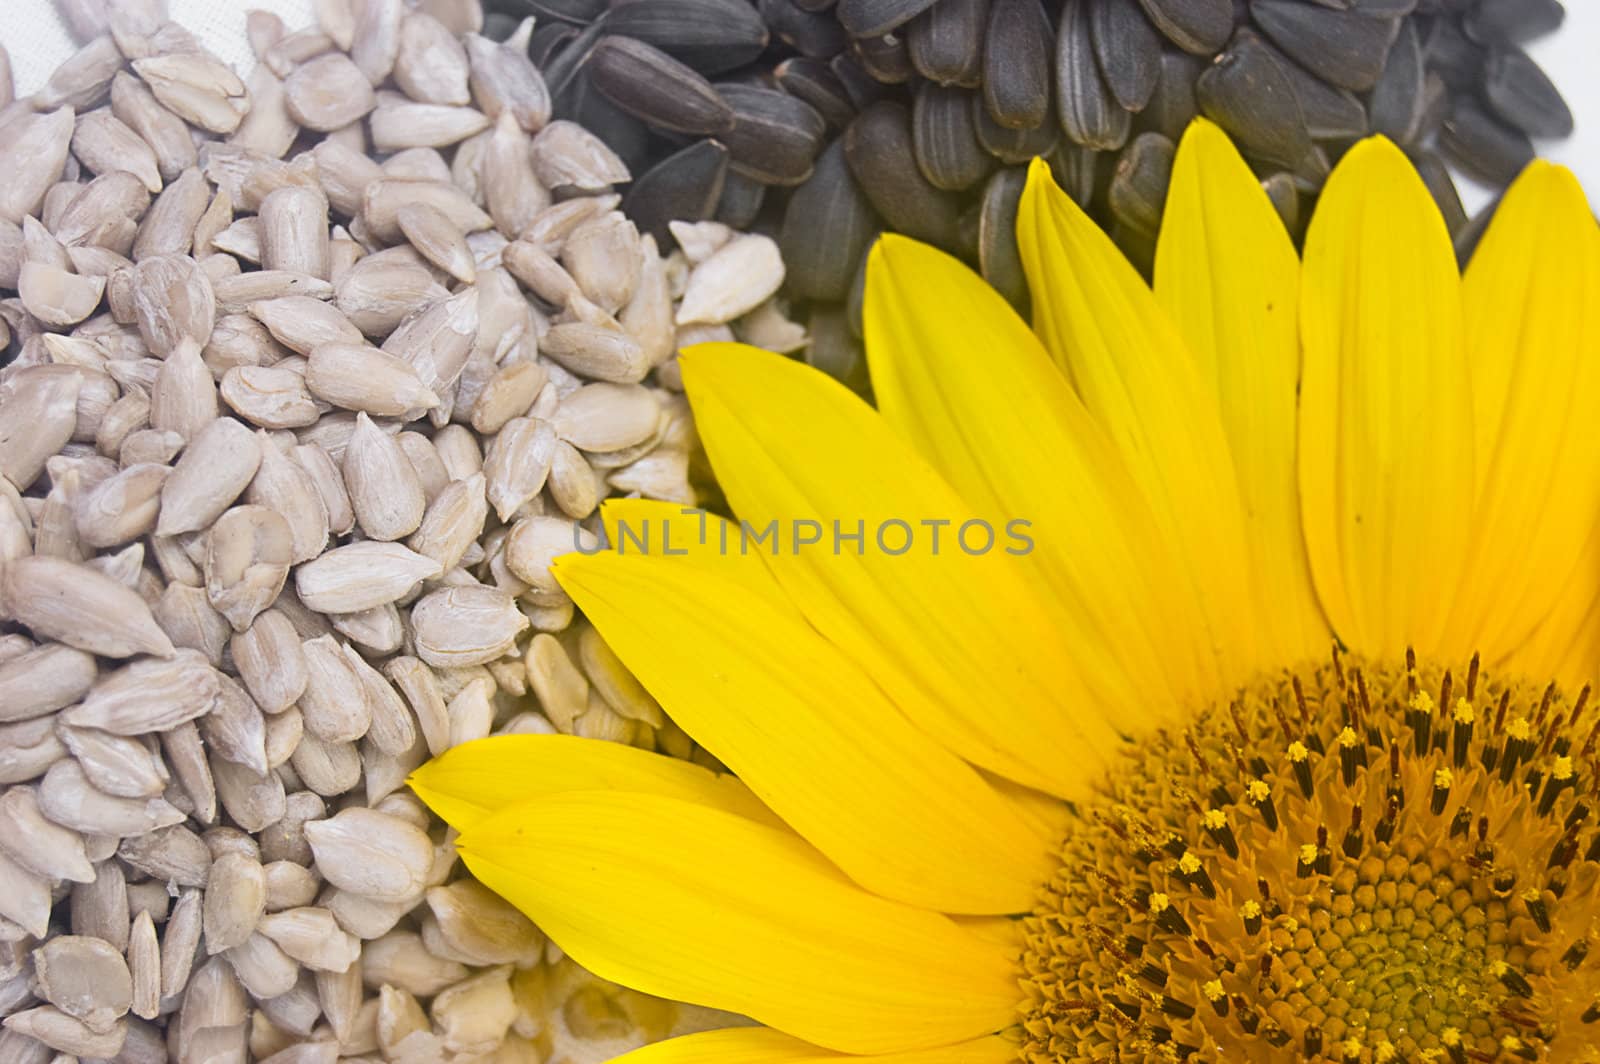 Sunflower seeds by Angel_a